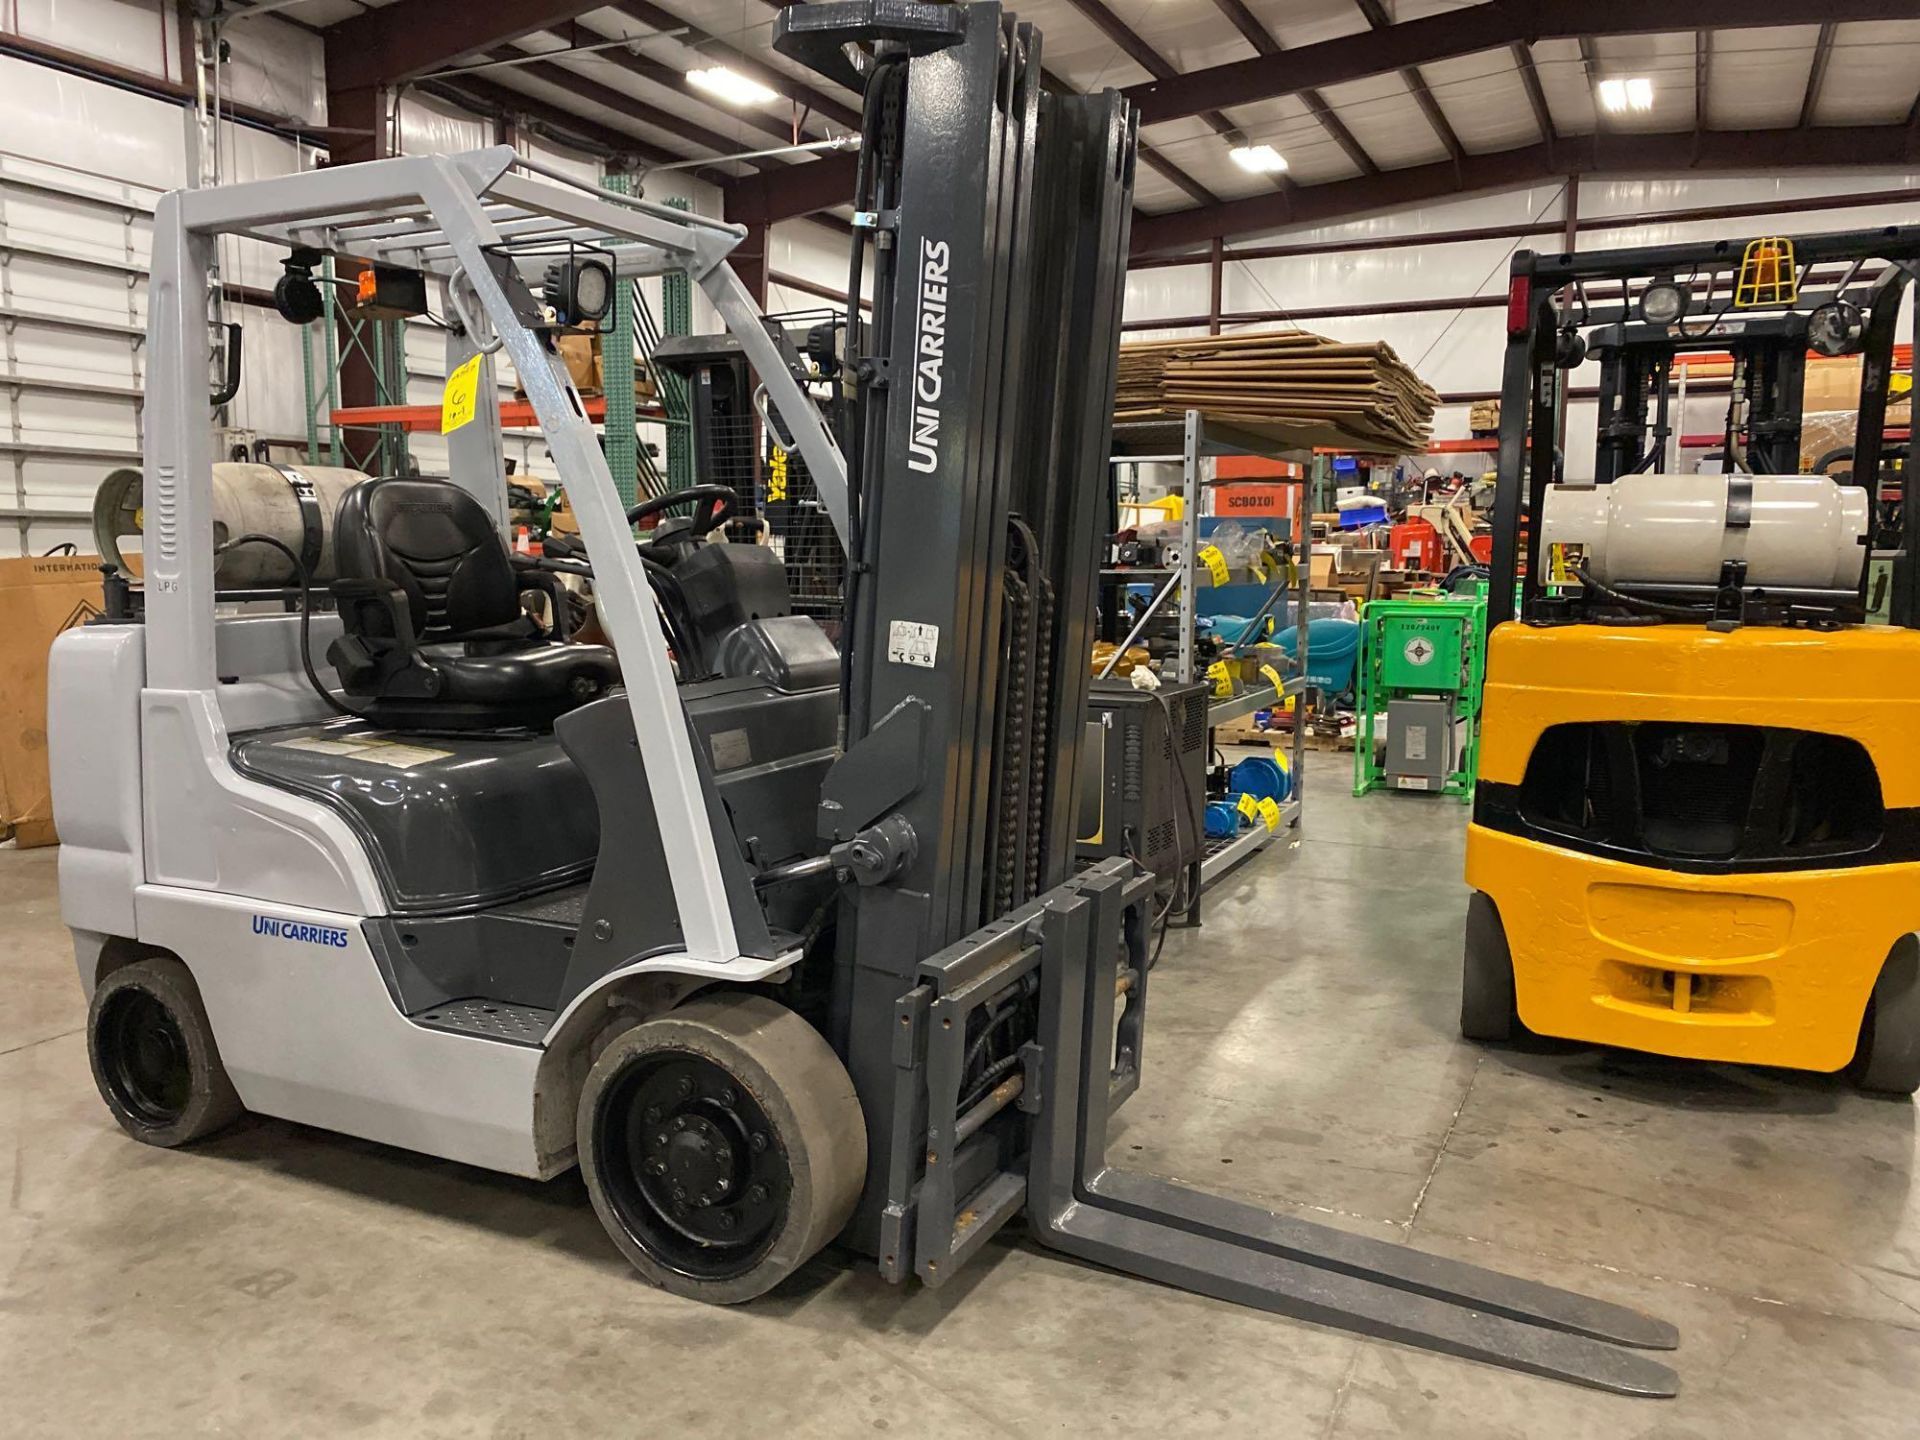 2014 UNICARRIERS LP FORKLIFT MODEL MCUG1F2F30LV, APPROX. 6,000 LB CAPACITY